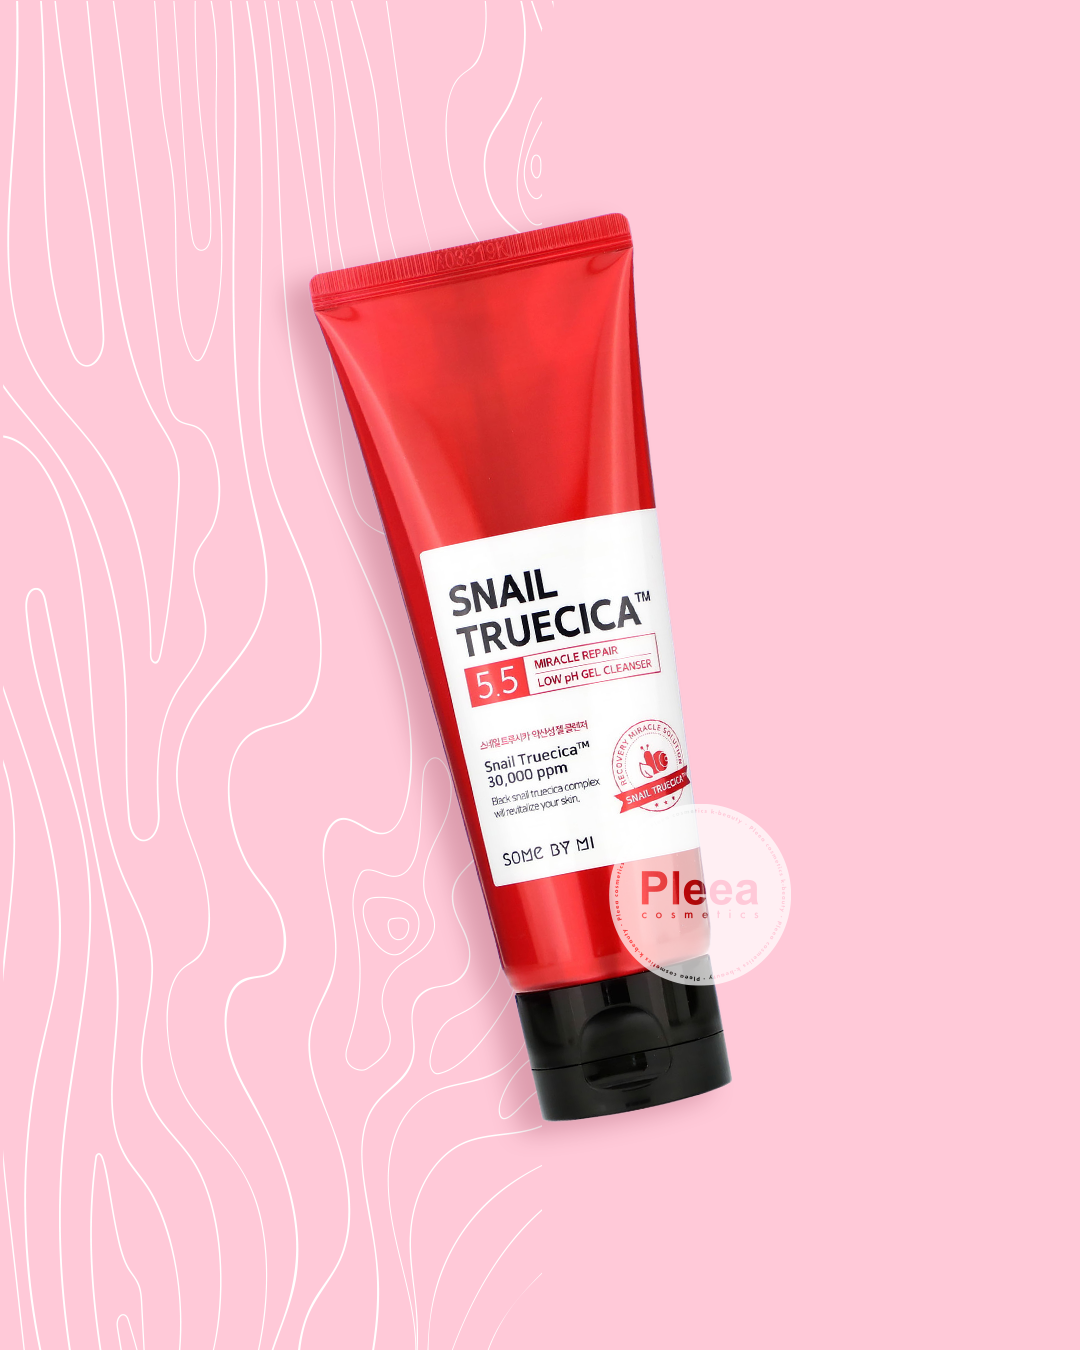 Some-by-mi-Snail-Truecica-Miracle-Repair-Low-ph-Gel-Cleanser-k-beauty-colombia-cosmetica-coreana